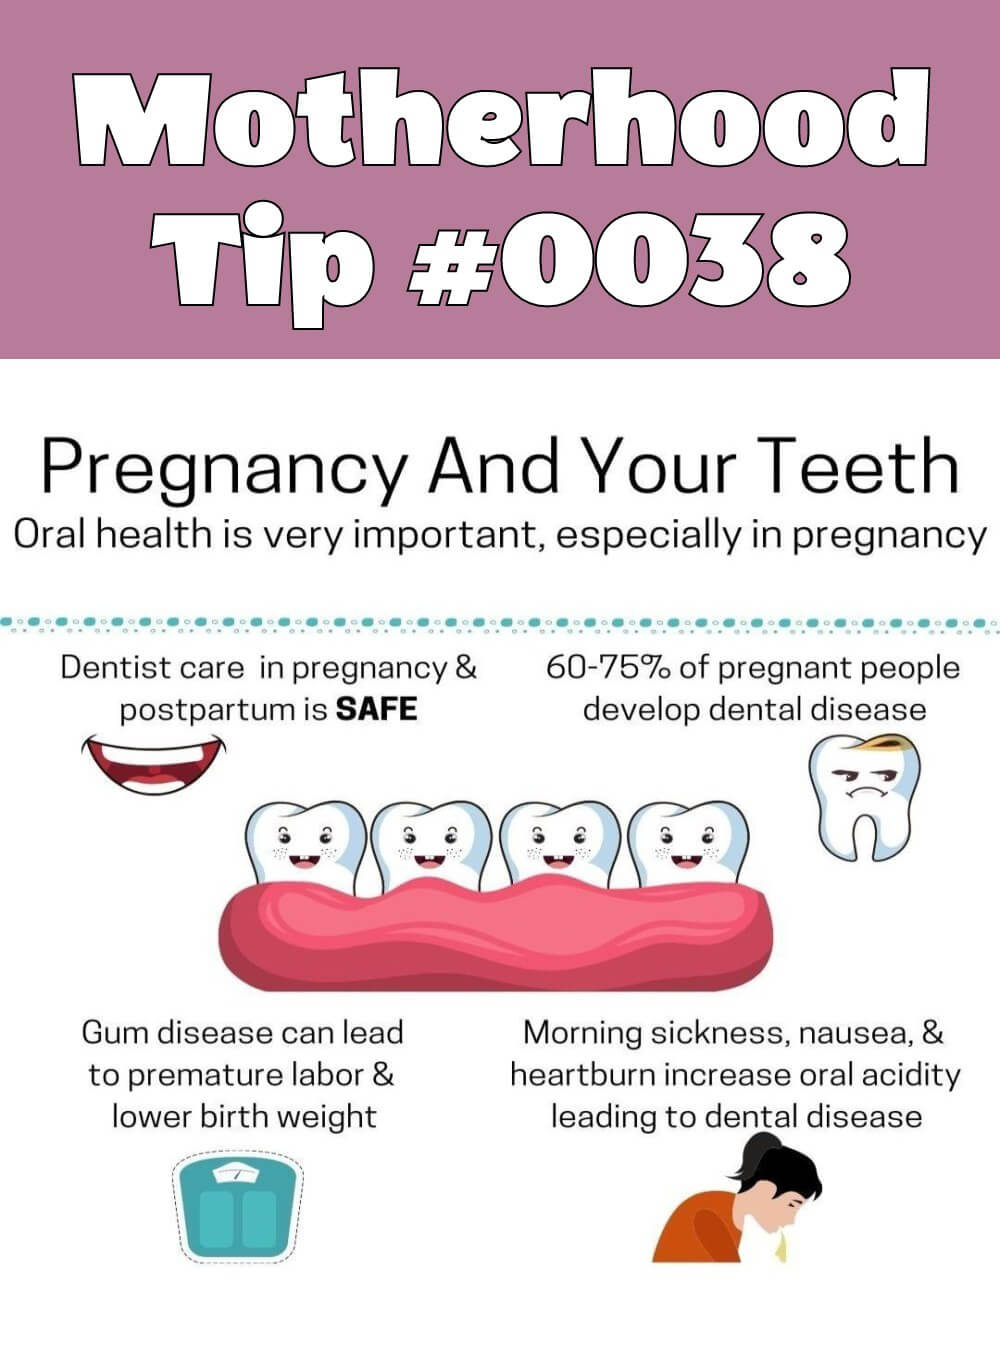 Parenting and Pregnancy Infographic | Motherhood Tip #0038